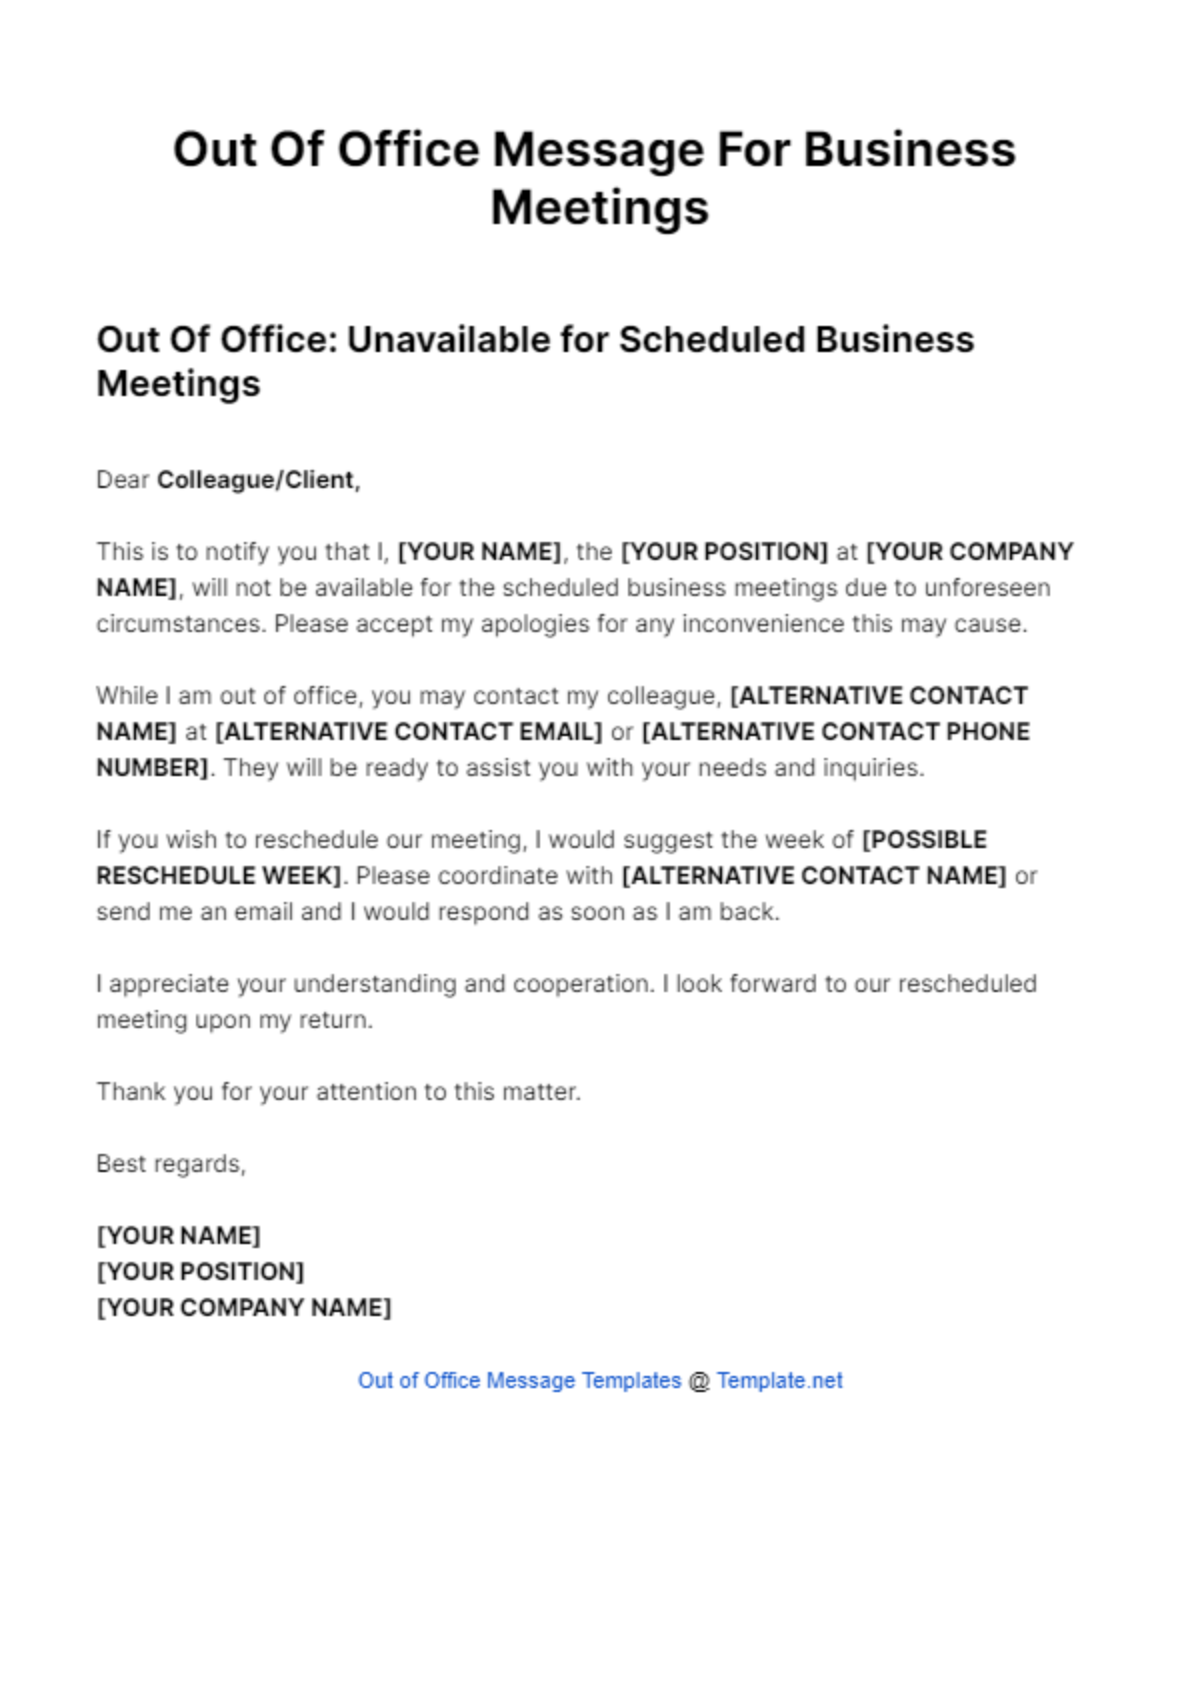 Free Out Of Office Message For Business Meetings Template